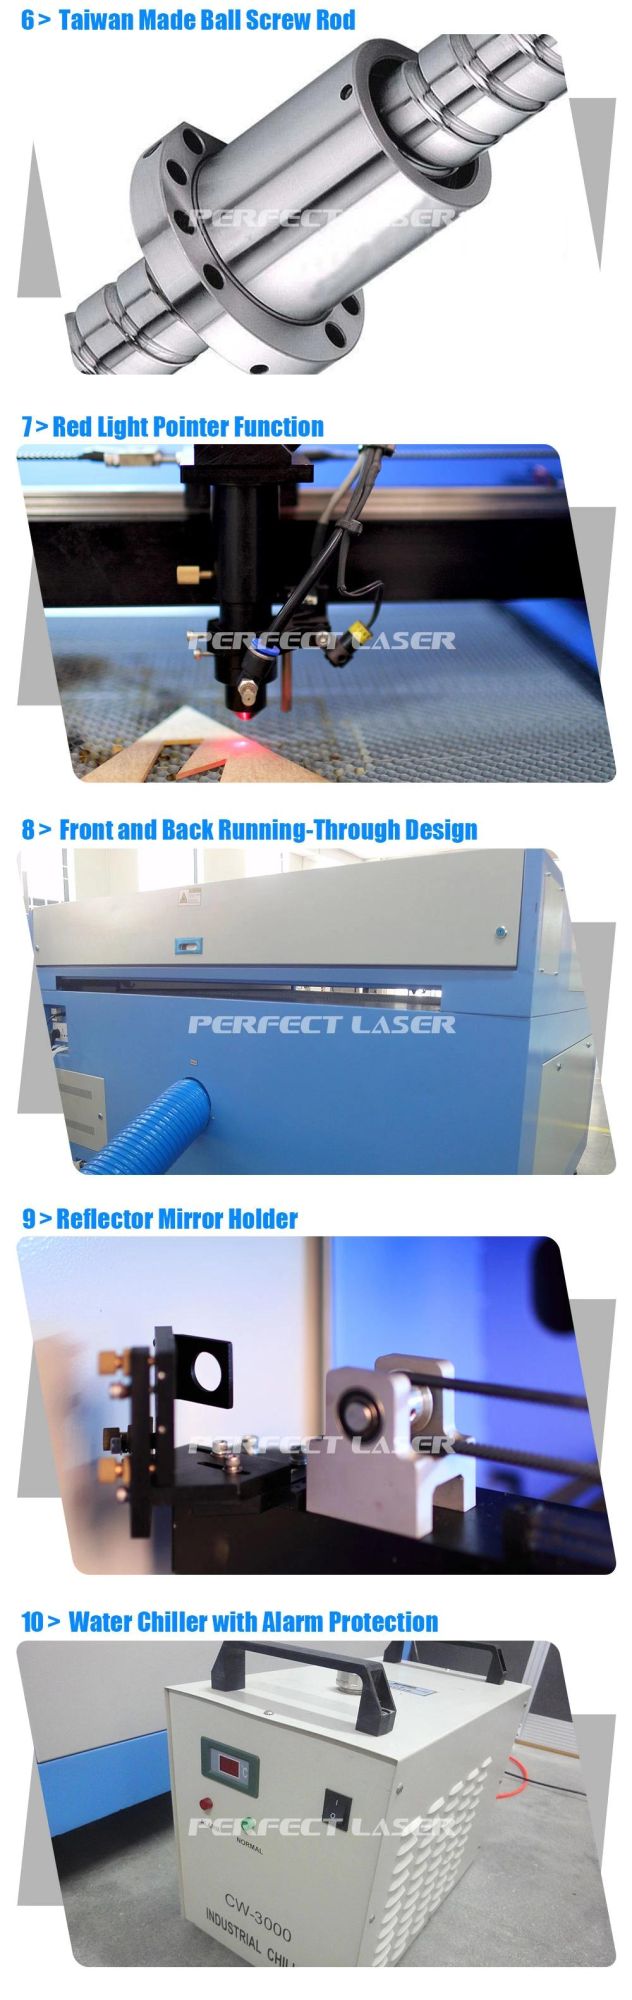 Hotsale 13090 Double Head CO2 Laser Engraving Cutting Machine Good Price